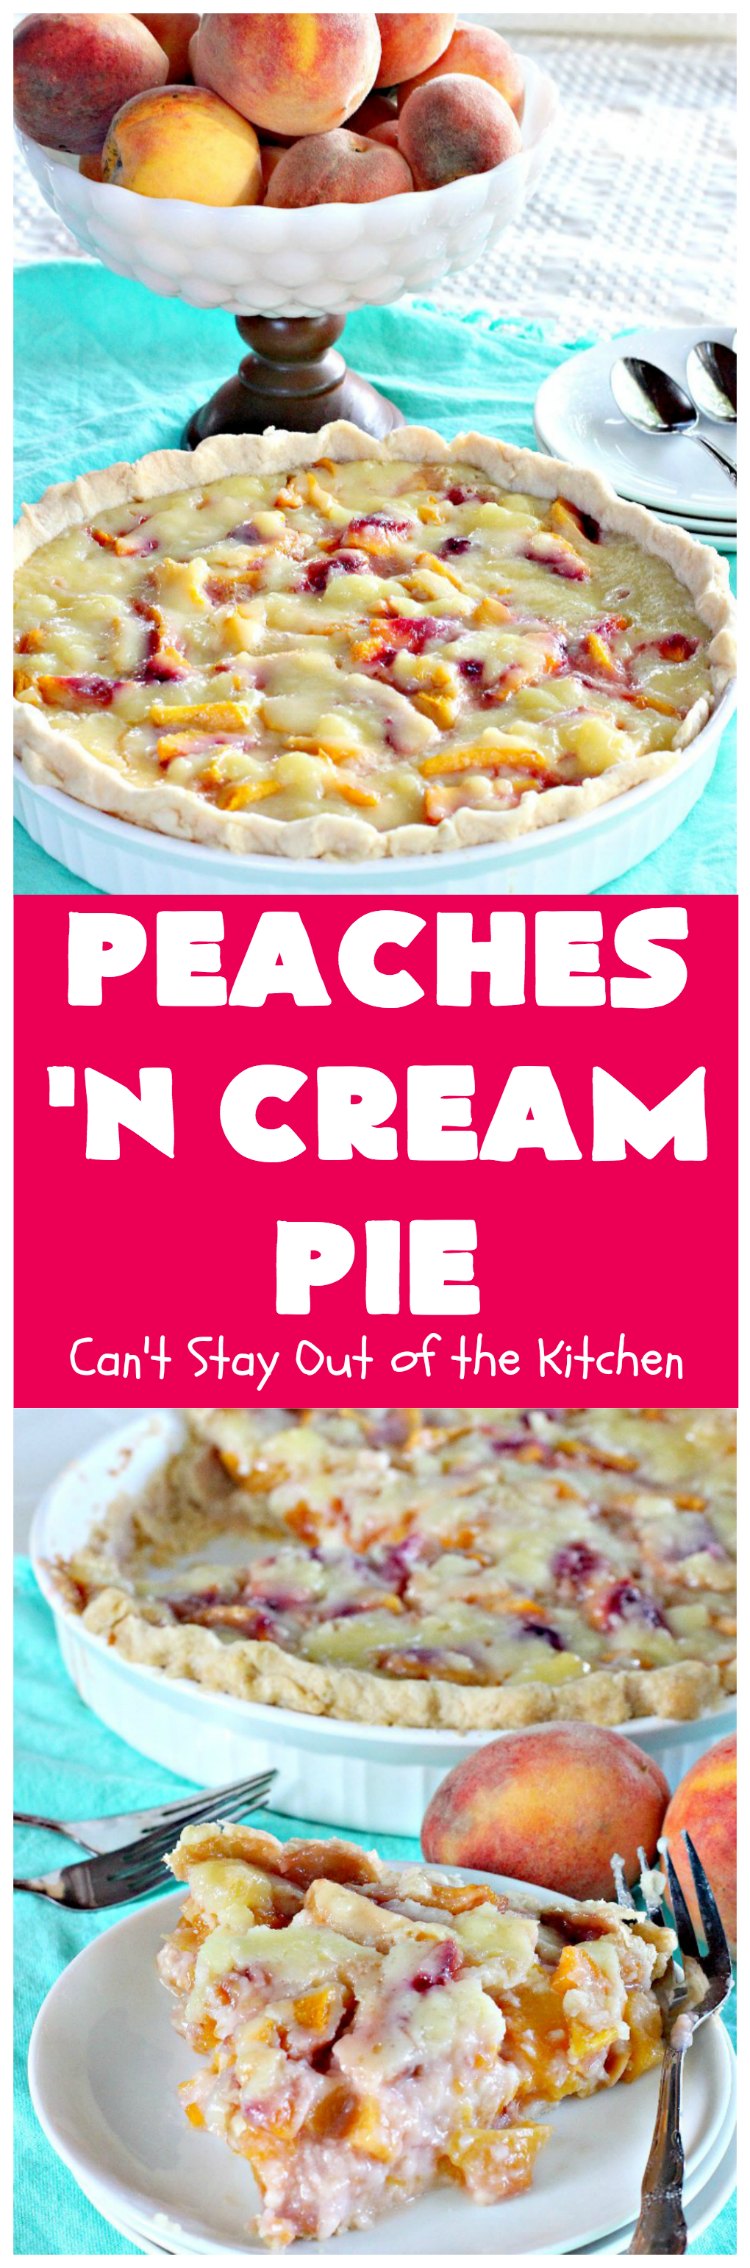 Peaches 'n Cream Pie | Can't Stay Out of the Kitchen